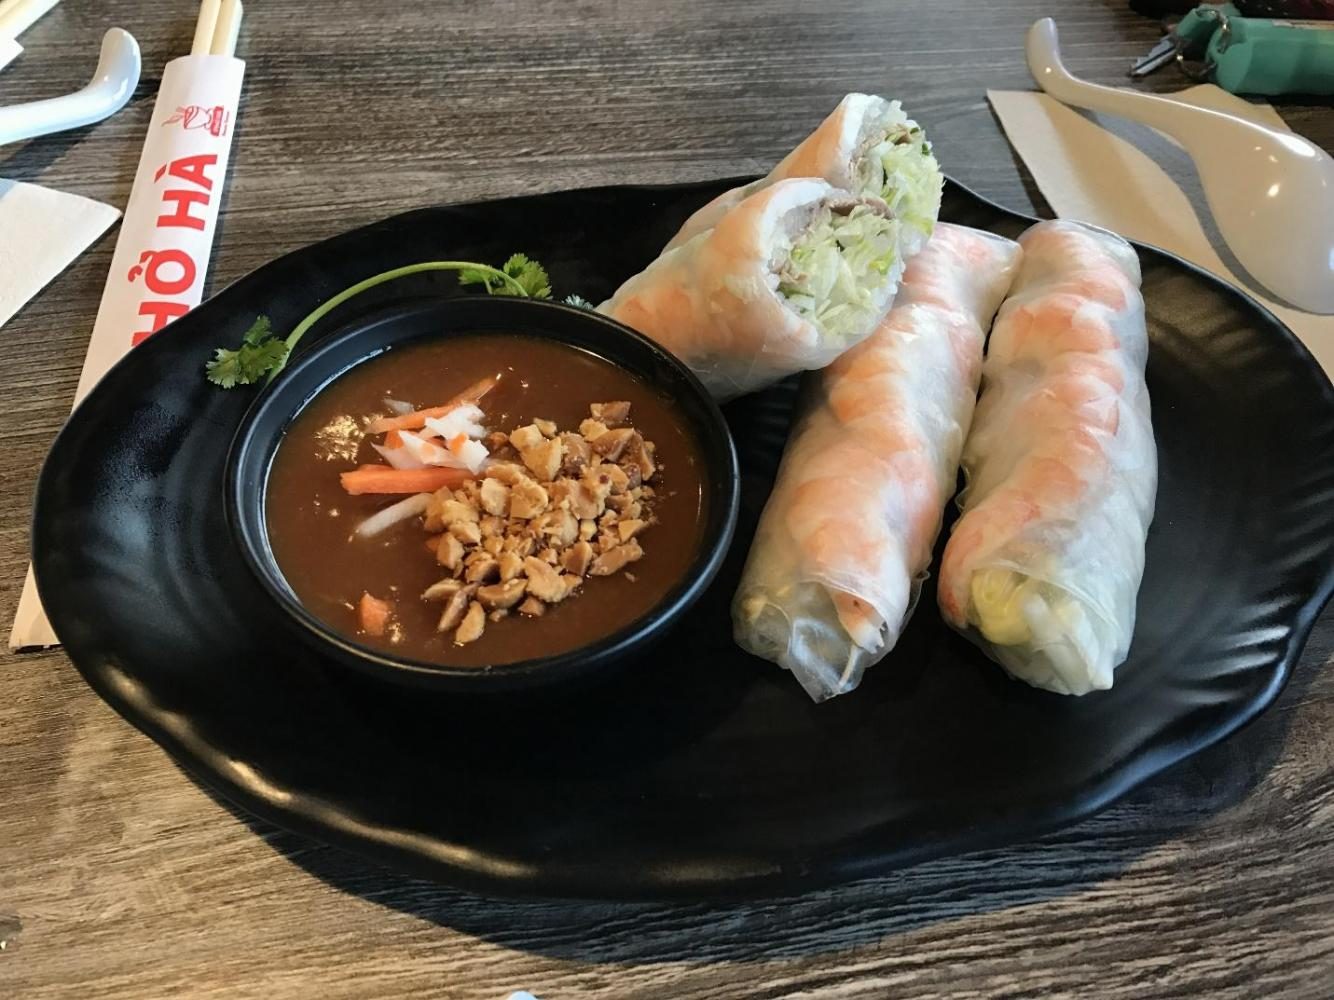 AMELIE+LEE%0APho+noodles+and+shrimp+spring+rolls+with+peanut+sauce+are+served+at+the+newly+opened+Pho+Ha%2C+located+at+the+old+Bob%E2%80%99s+Big+Boy+location.+The+restaurant+also+offers+various+other+types+of+Vietnamese+food+and+drinks.